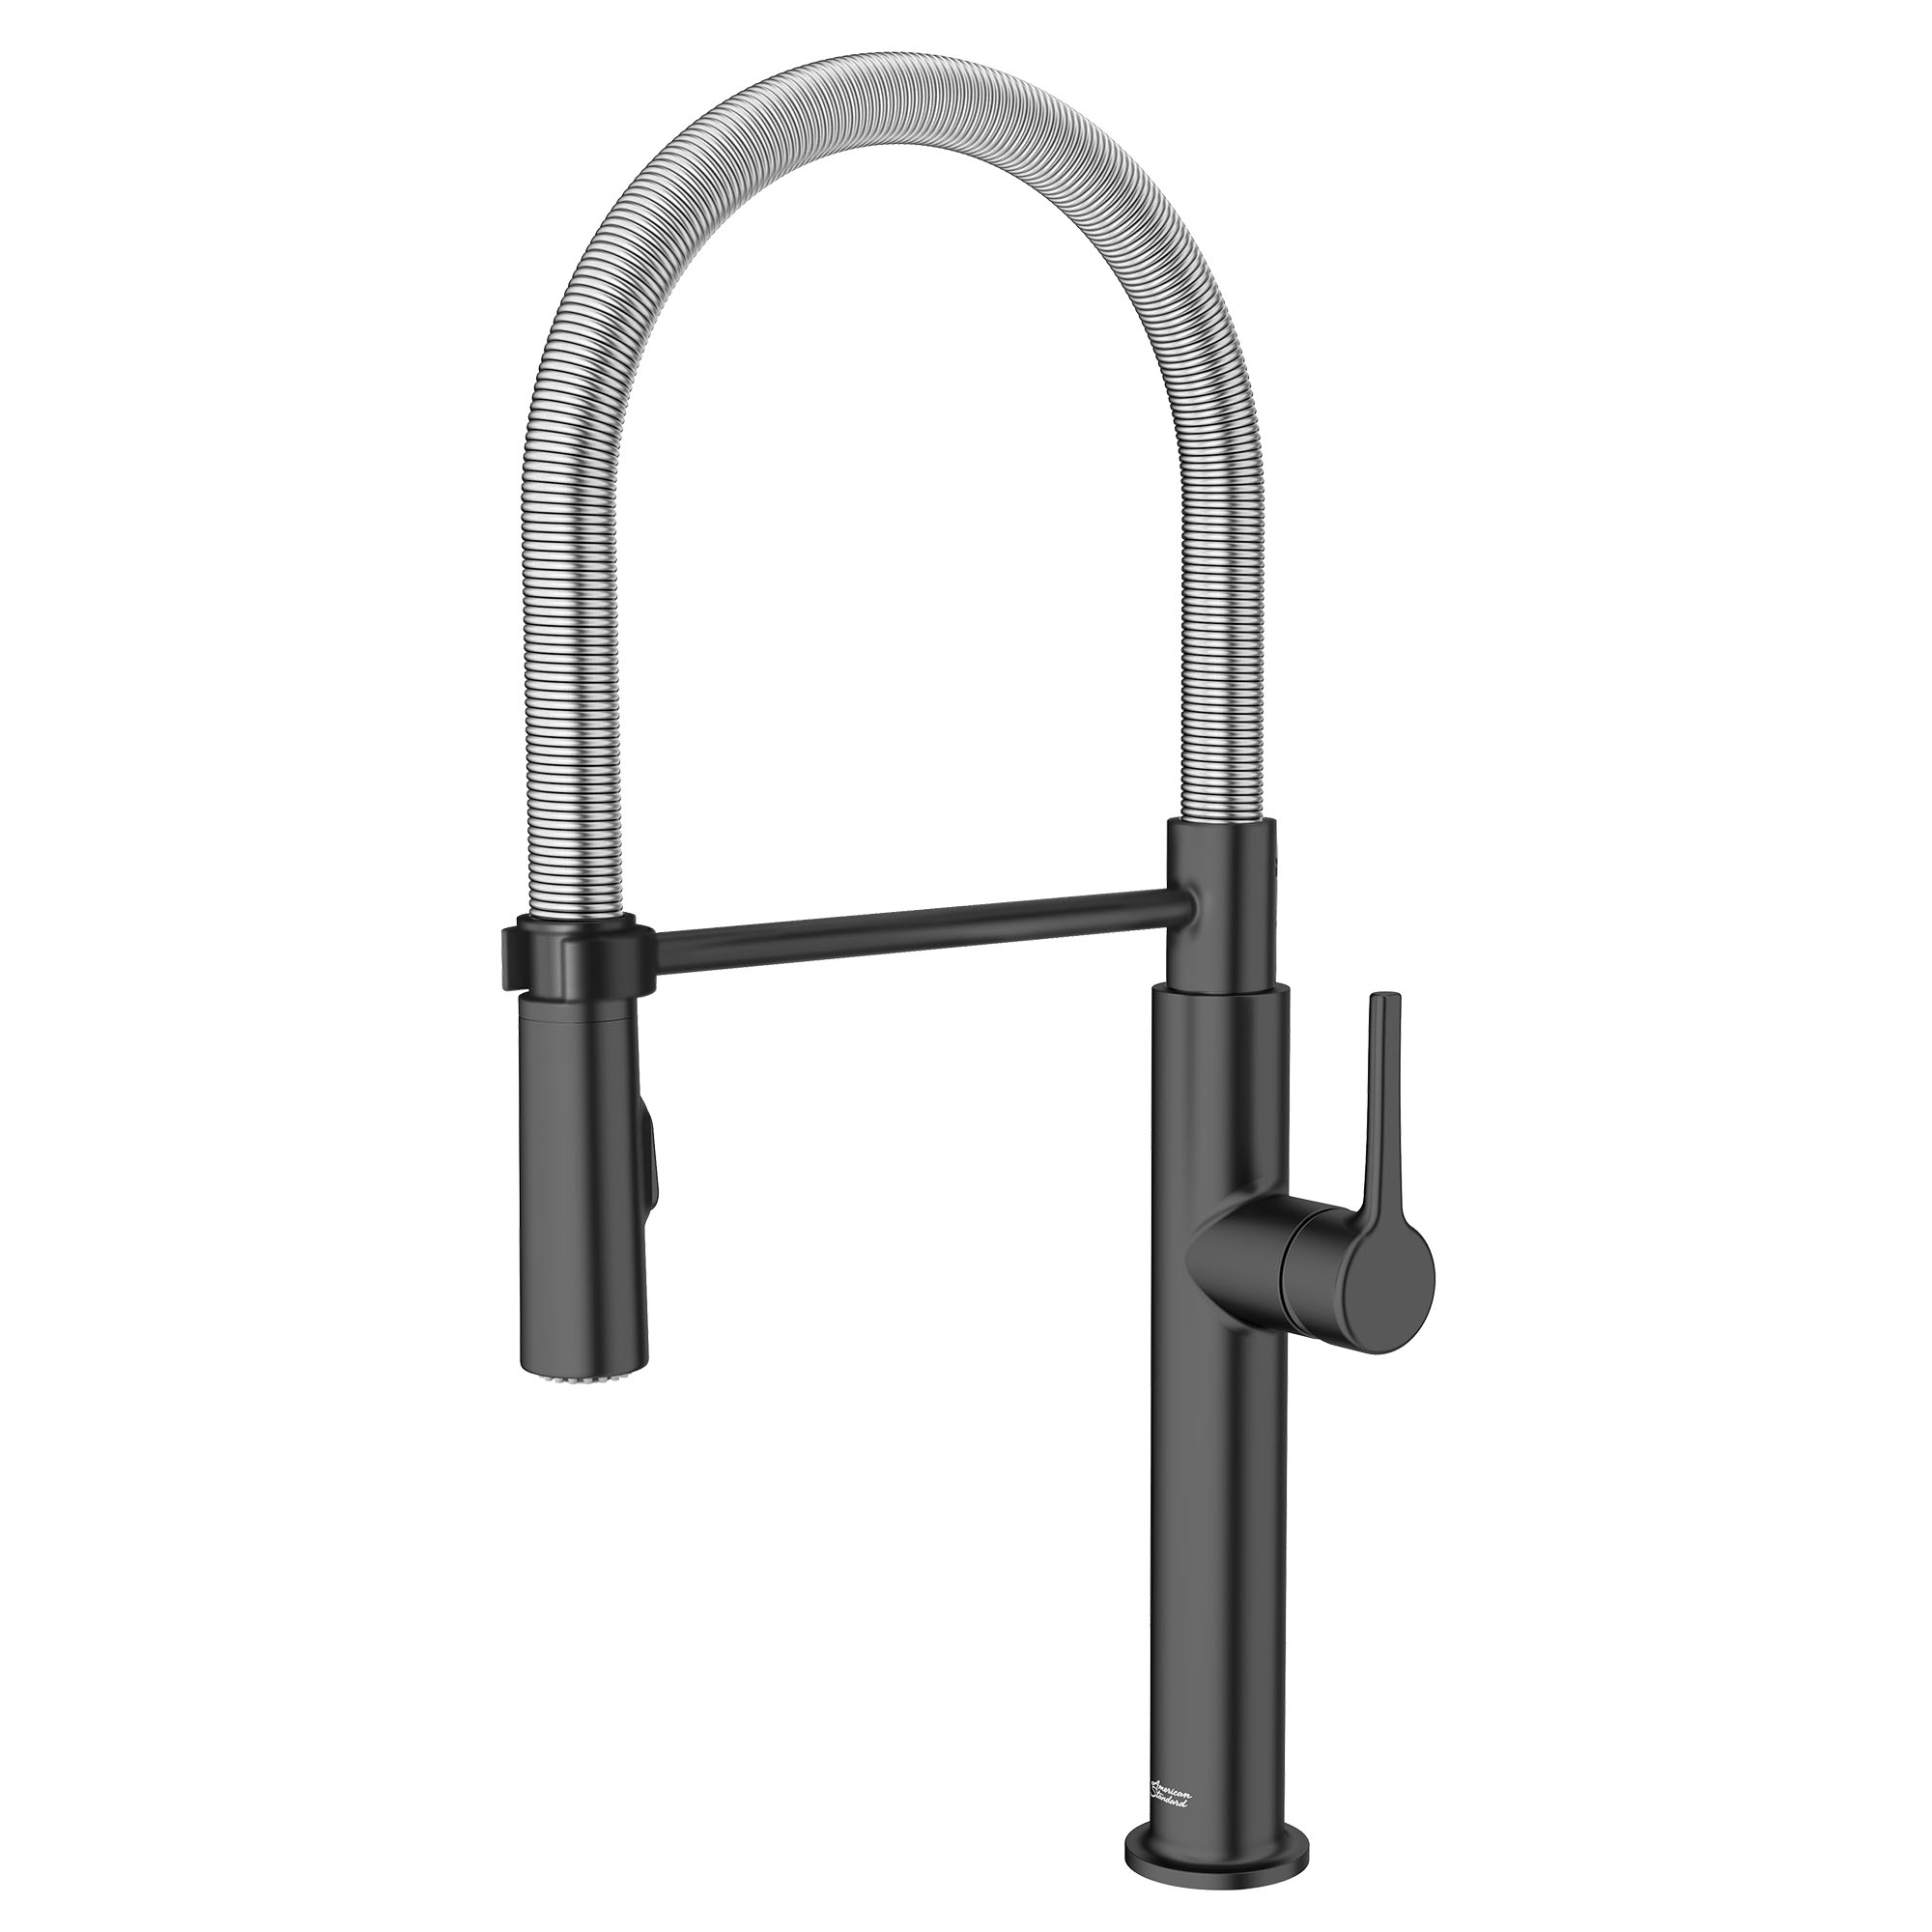 Studio™ S Semi-Pro Pull-Down Dual Spray Kitchen Faucet With Spring Spout